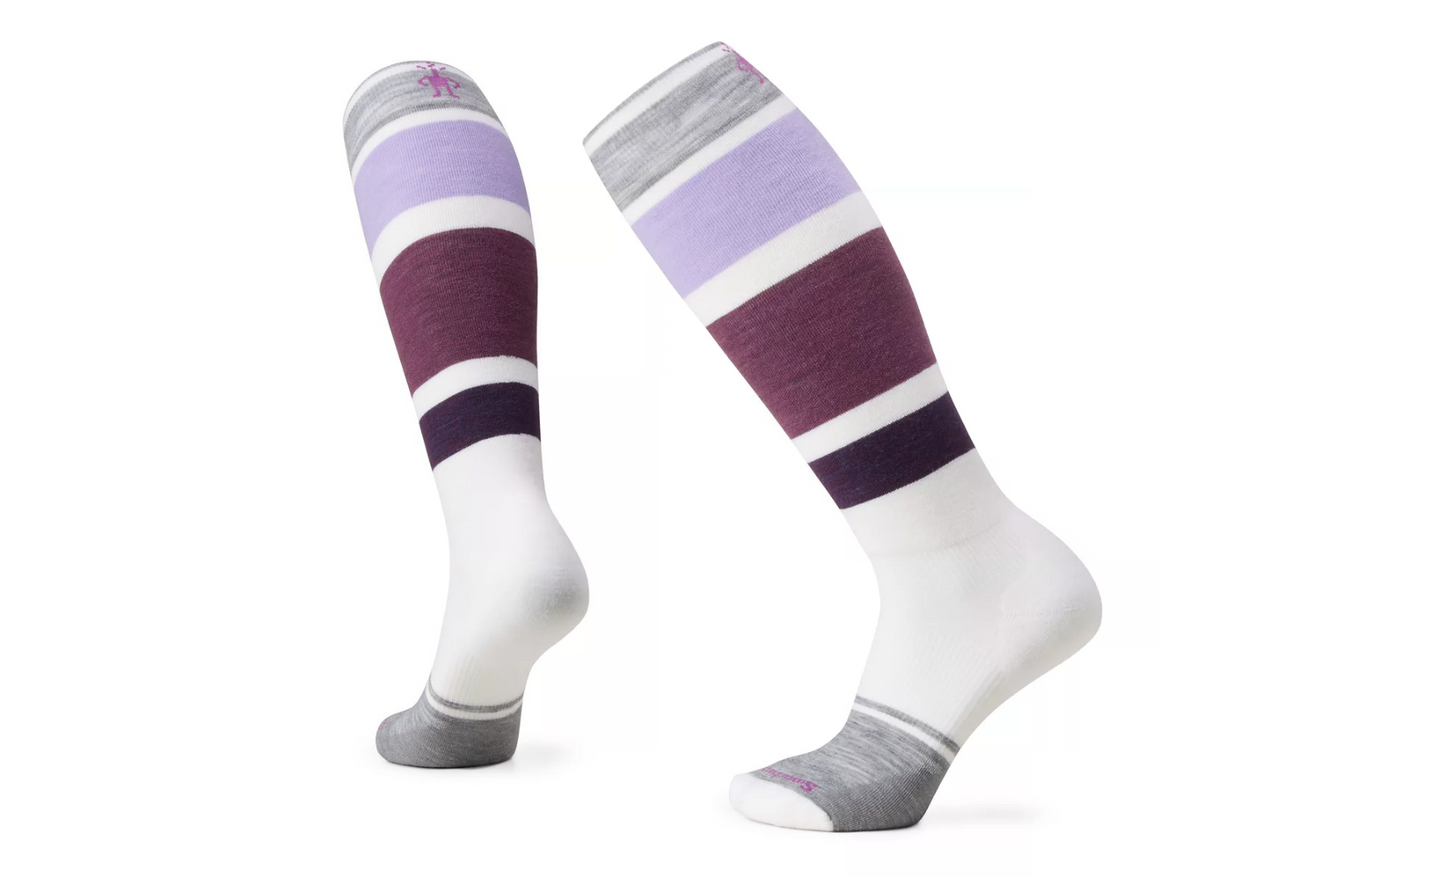 Smartwool Women's Snowboard Targeted Cushion Over The Calf Socks